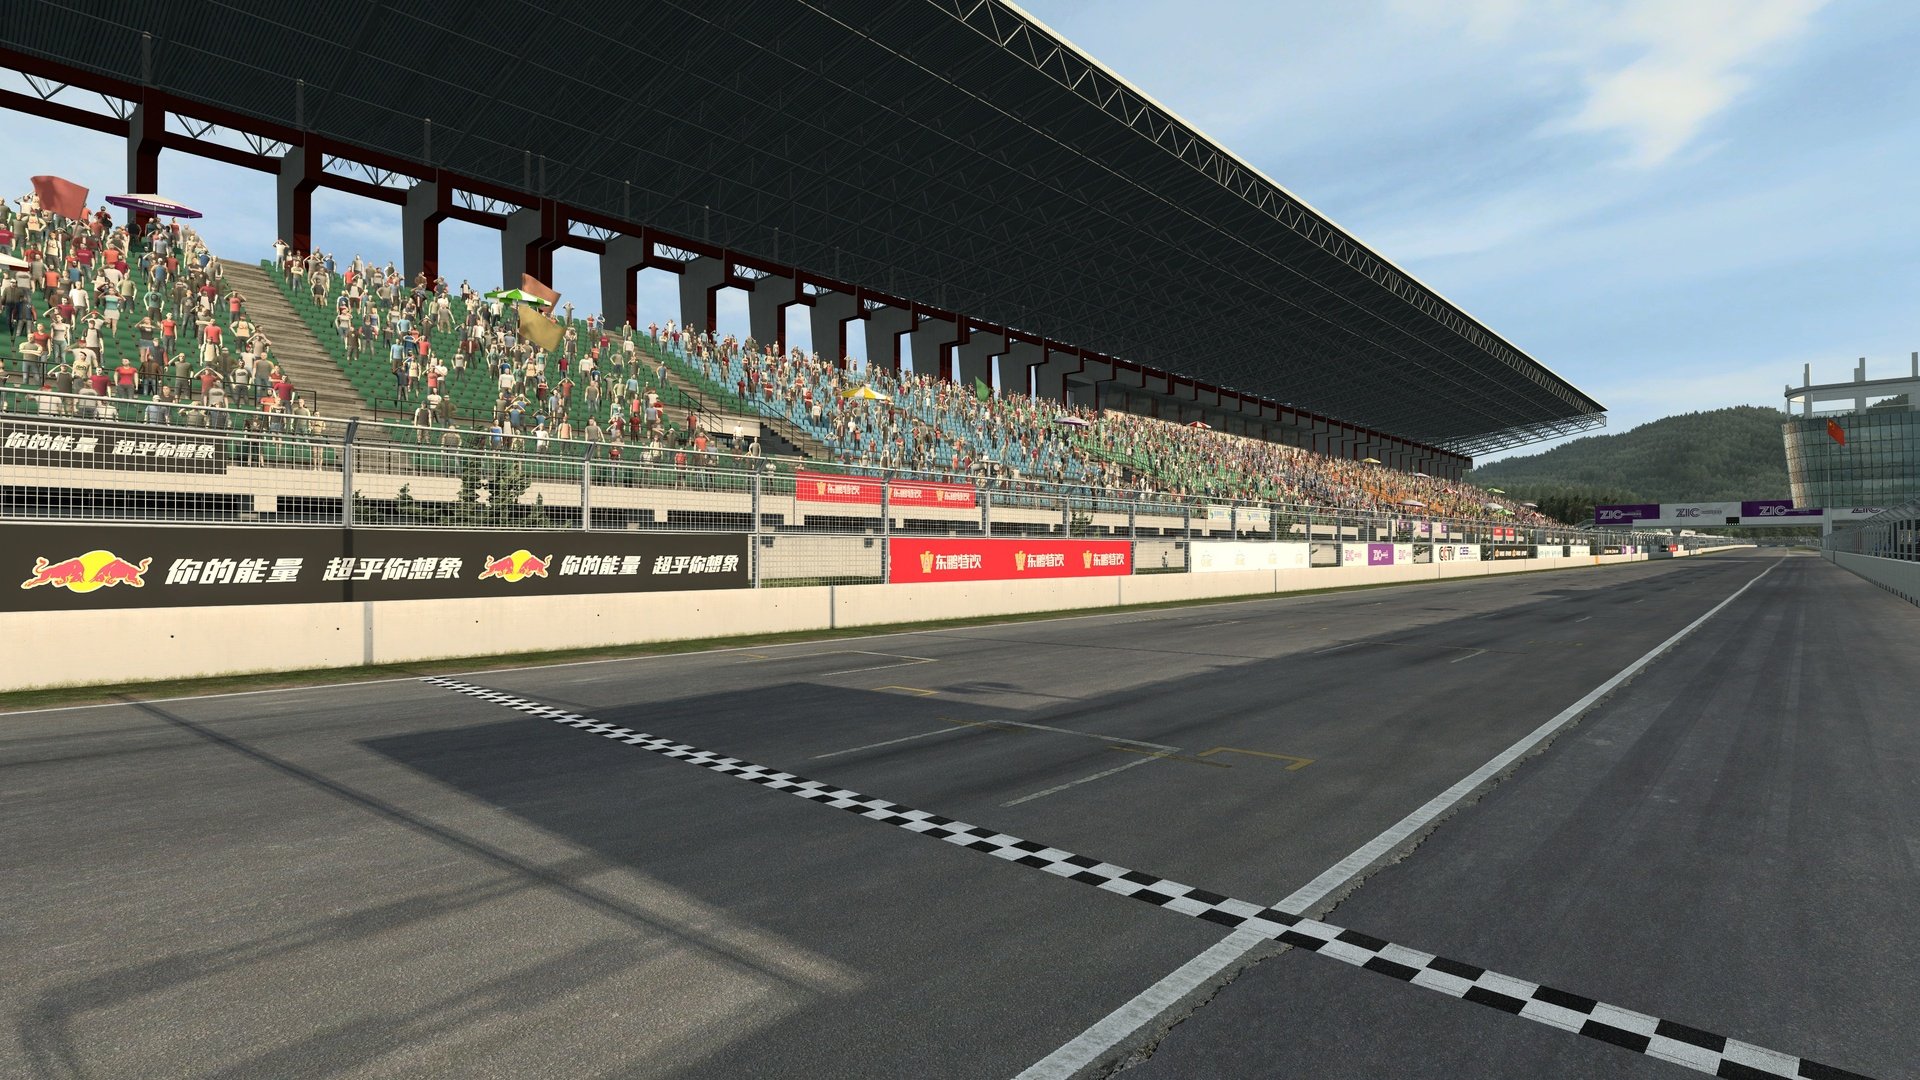 More information about "RaceRoom: nuovo update e Zhuhai disponibile"